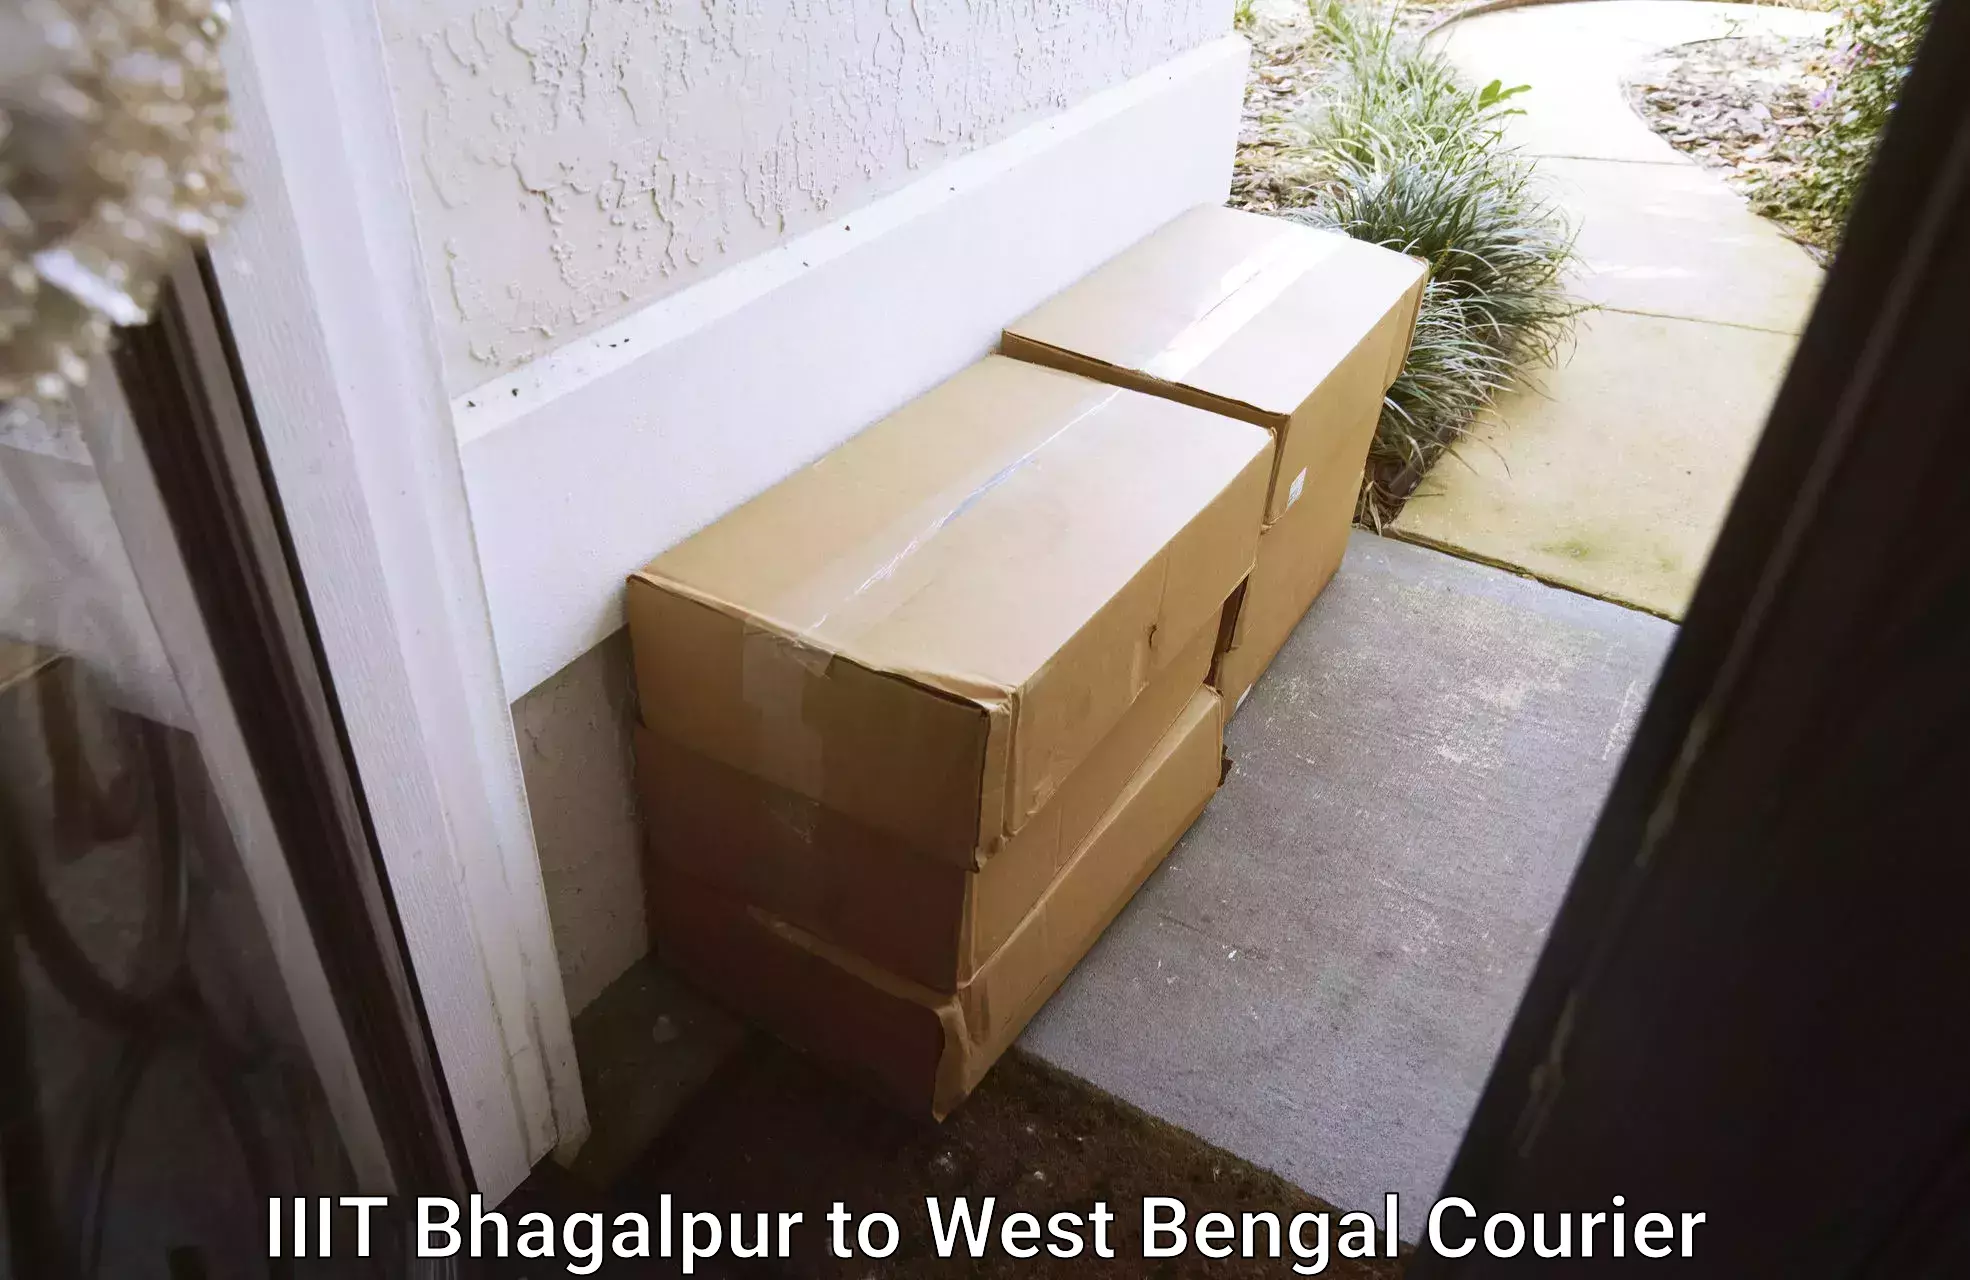 Budget-friendly movers IIIT Bhagalpur to West Bengal